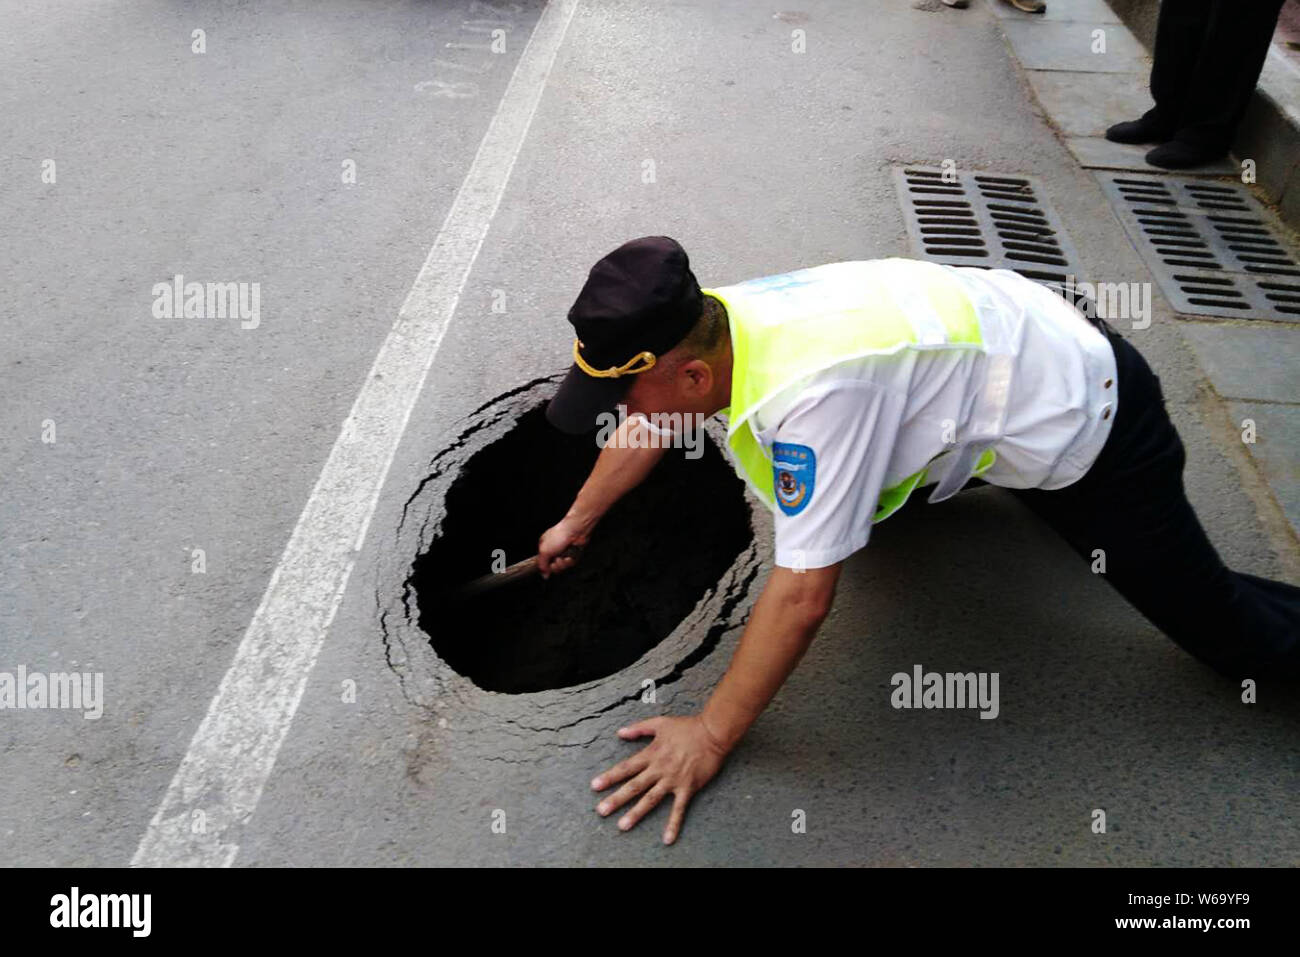 A Chinese auxiliary traffic police officer checks a sinkhole in a cordoned-off area on a street in Zhengzhou city, central China's Henan province, 4 J Stock Photo